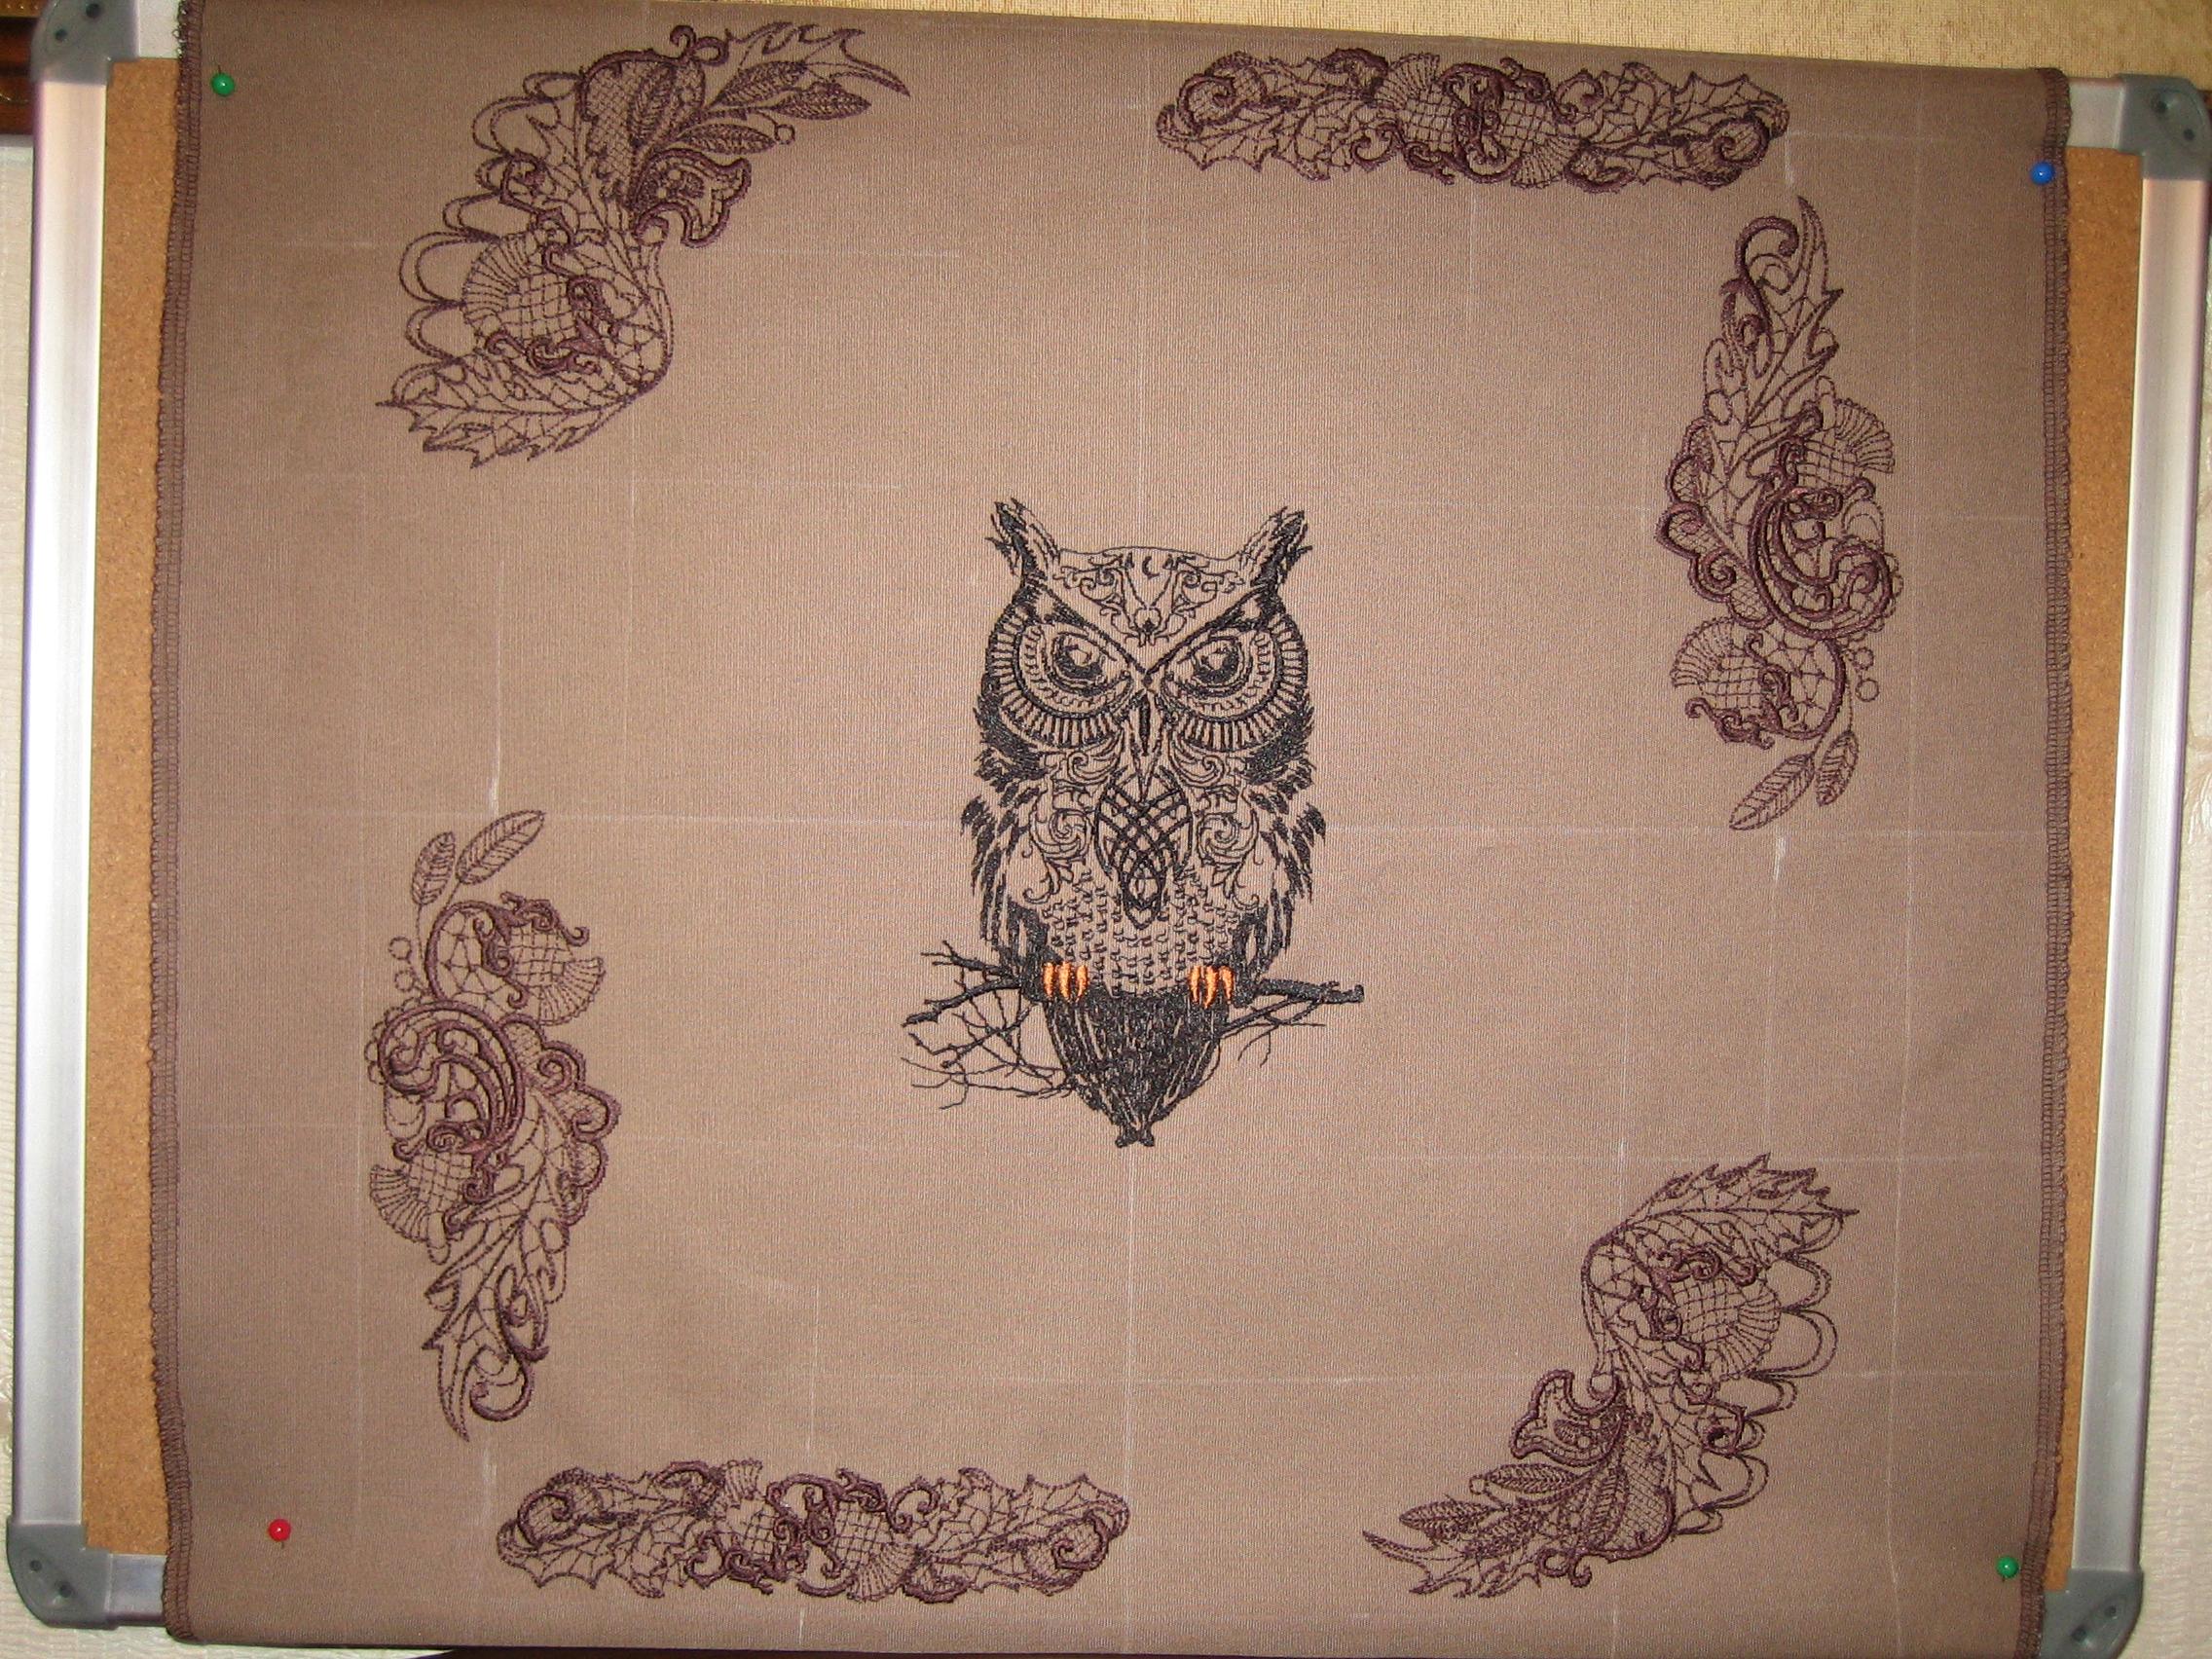 Wall panno with Tribal owl embroidery design